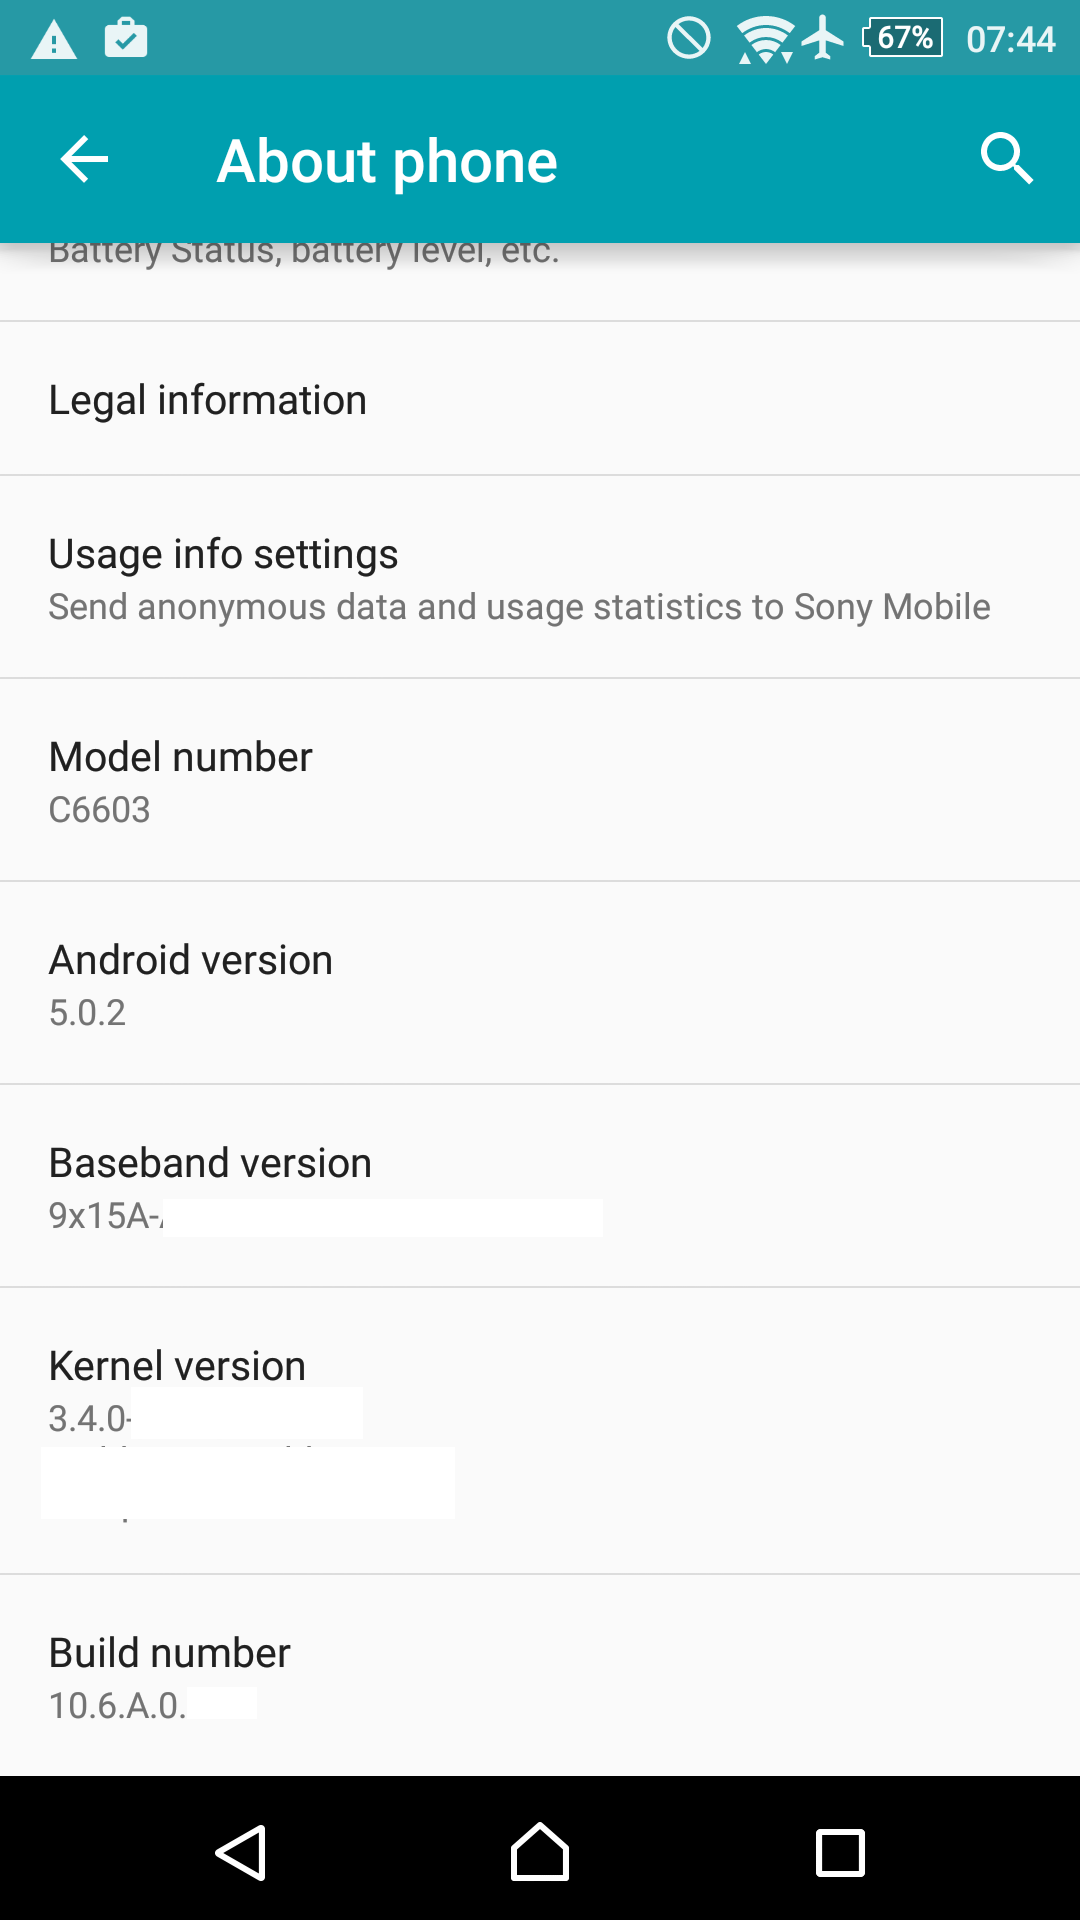 Xperia "Z" Lollipop Update rolling out by next week